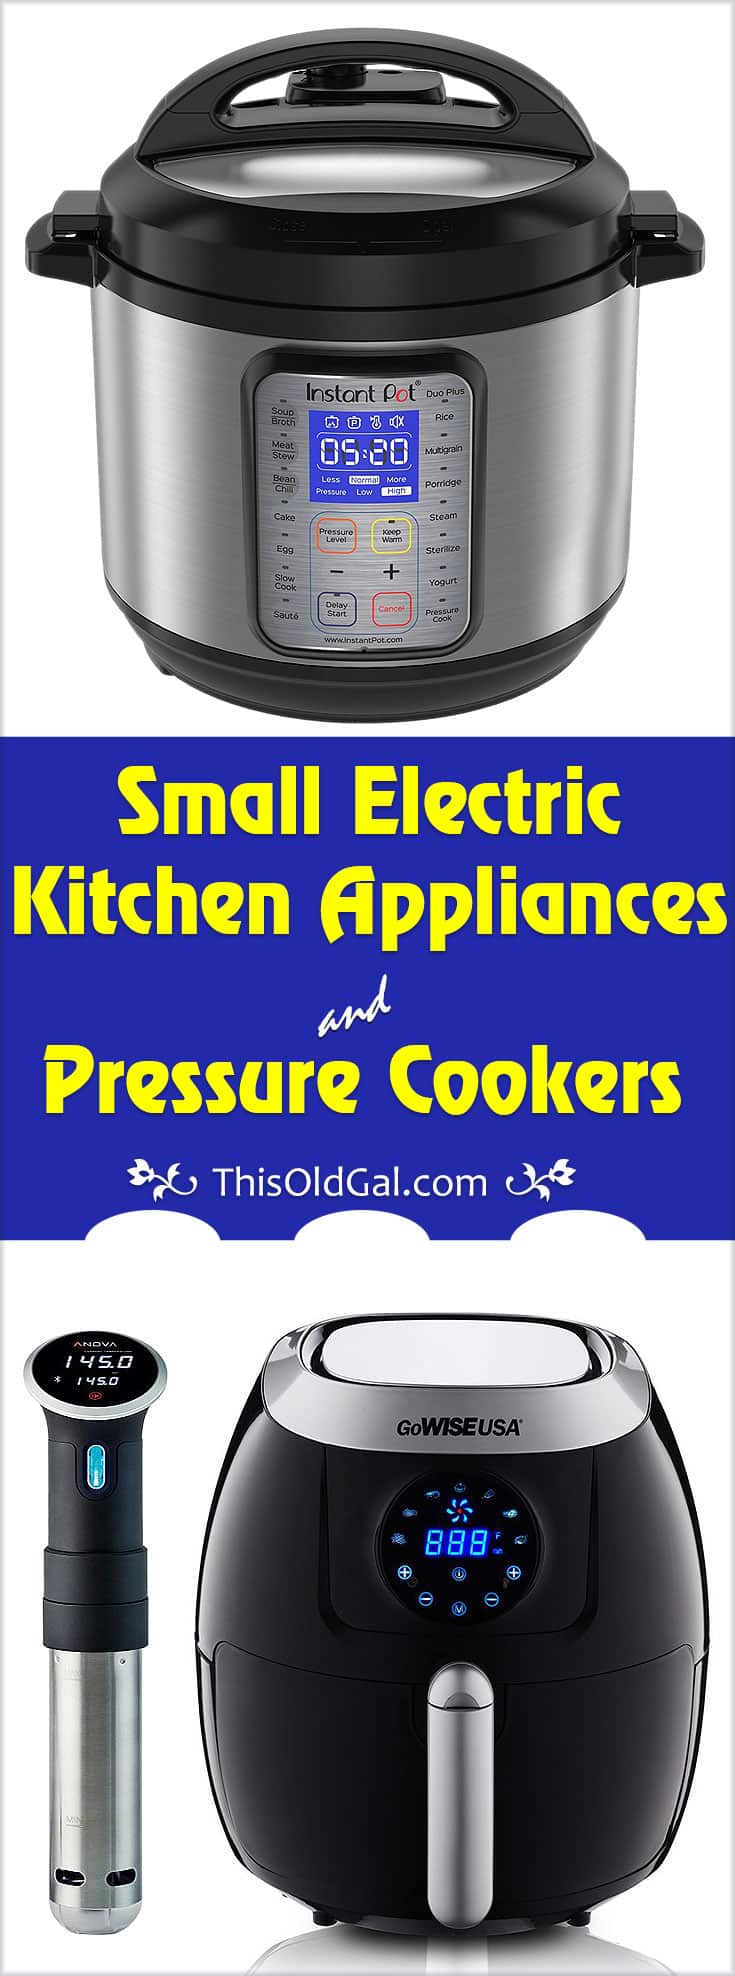 Small Electric Kitchen Appliances & Pressure Cookers